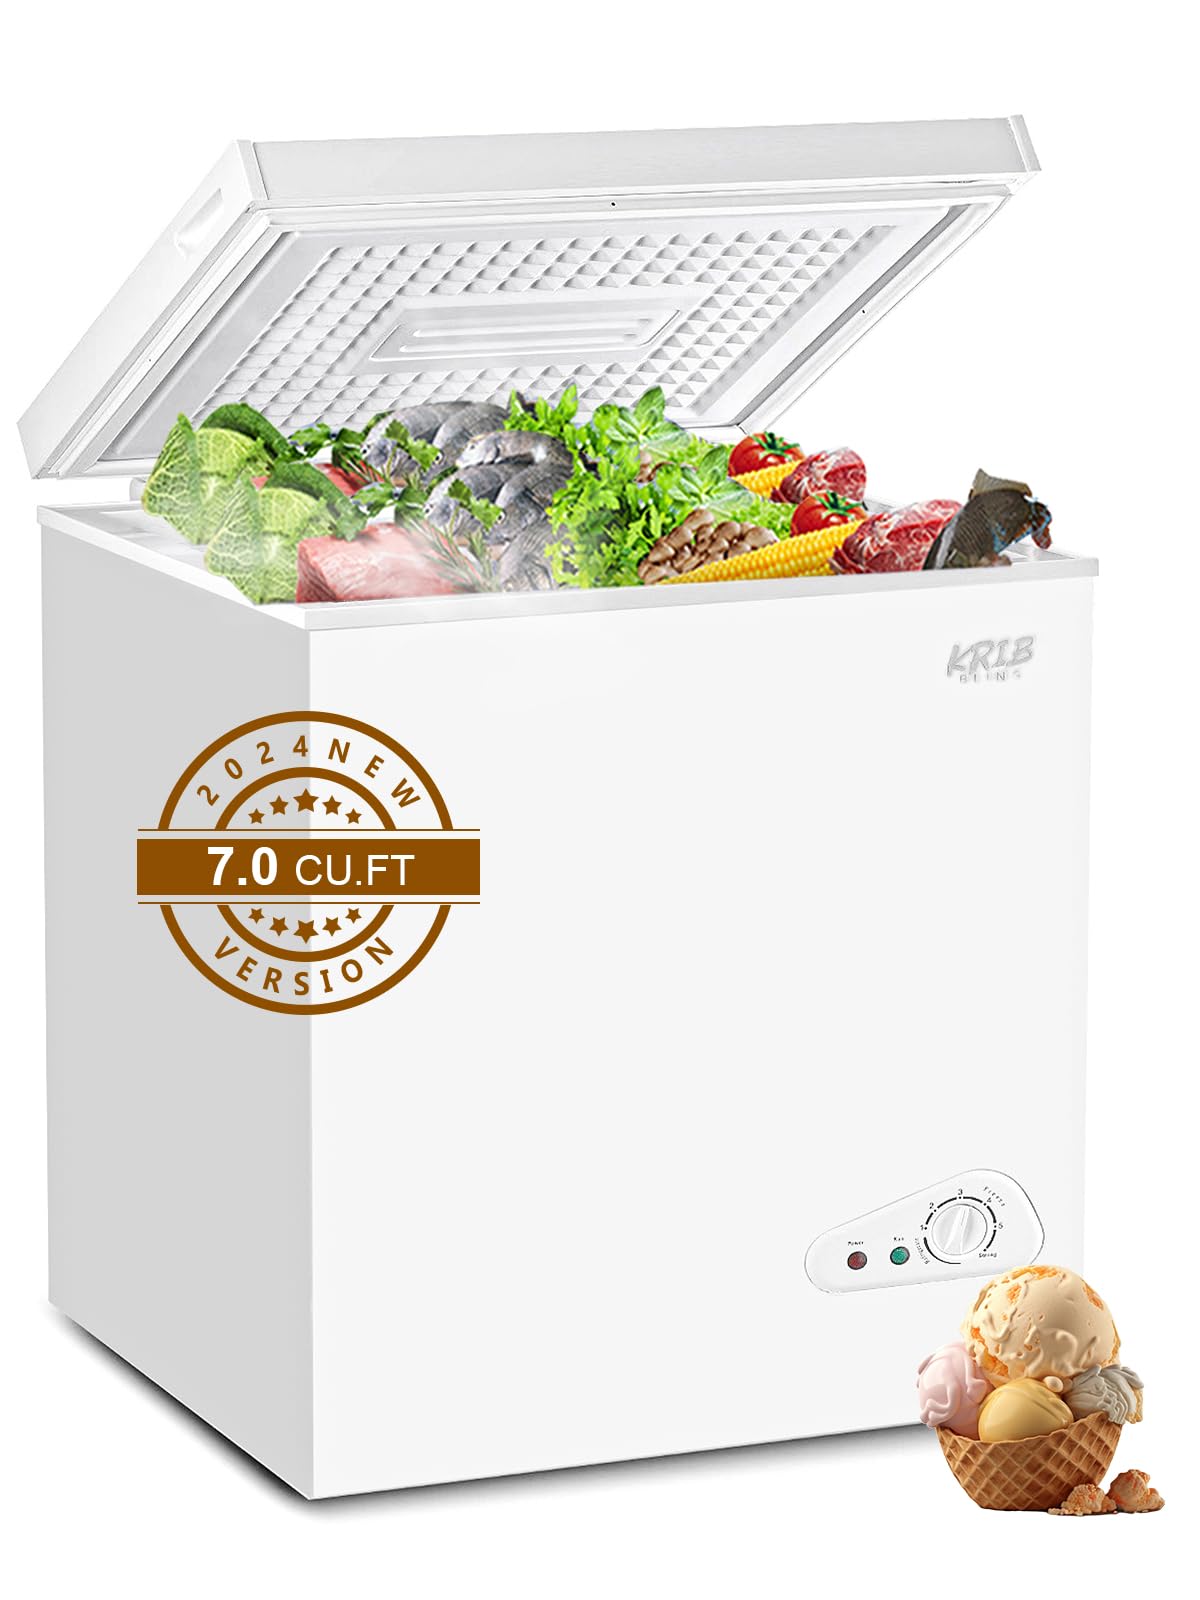 KRIB BLING 7.0 Cu.Ft Chest Freezer Compact Mini Deep Freezer with Top Open Door 7 Gears Temperature Control with Removable Storage Basket White